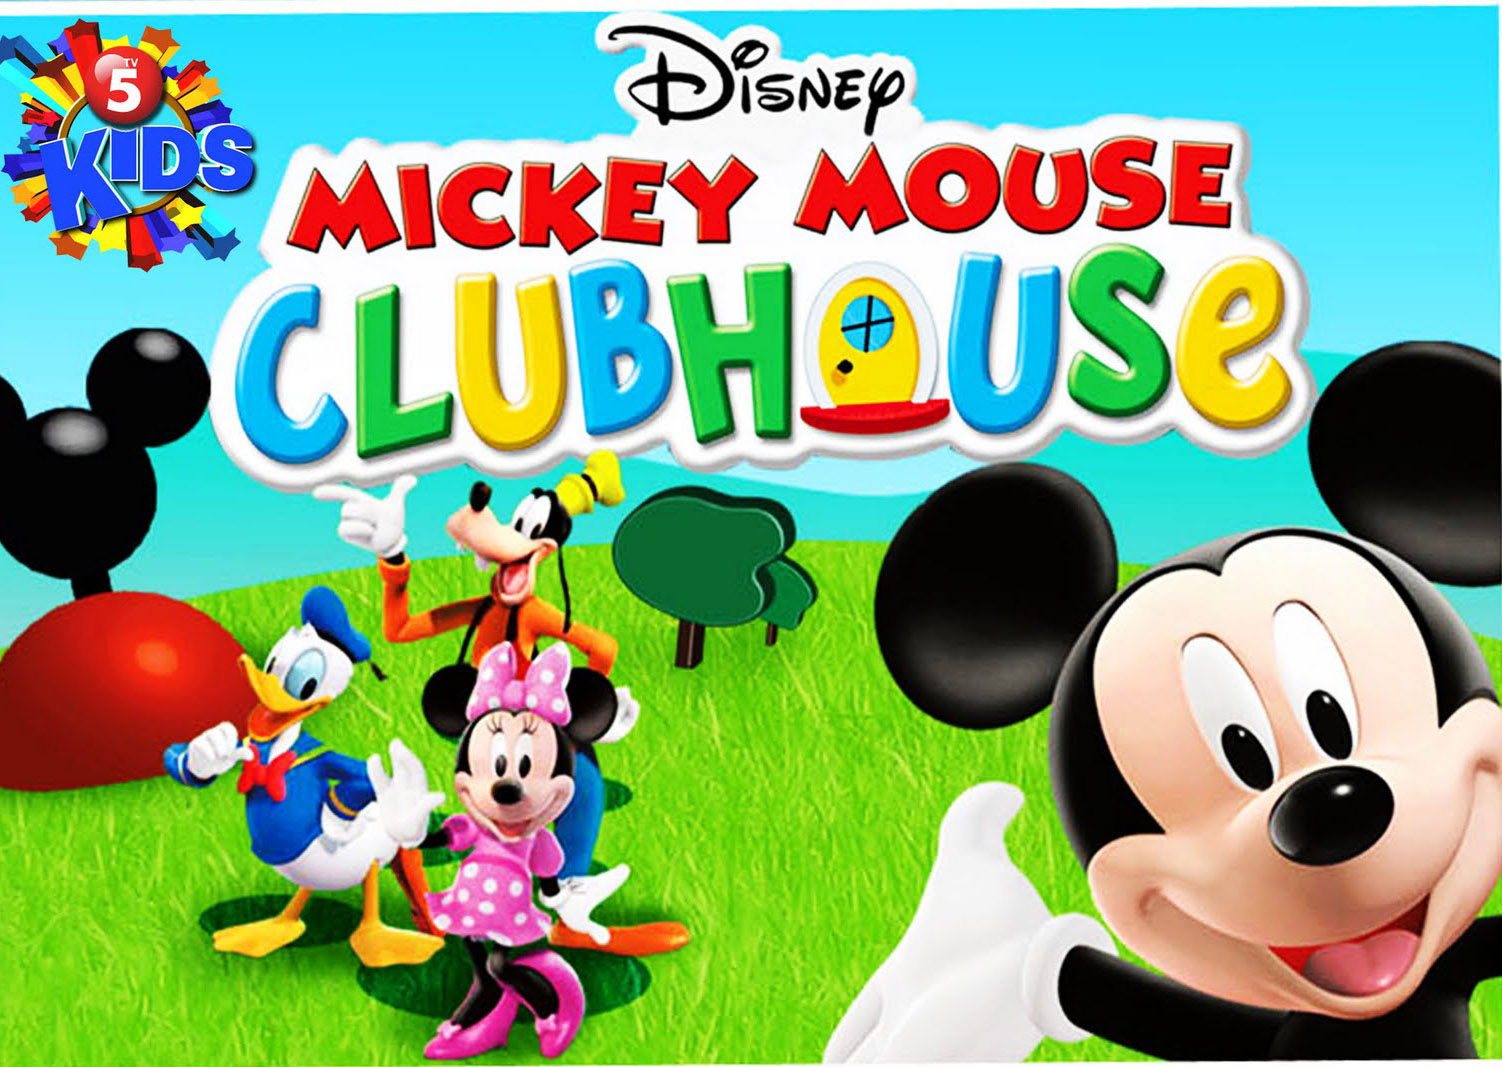 Walt Disney Mickey Mouse Clubhouse Wallpaper